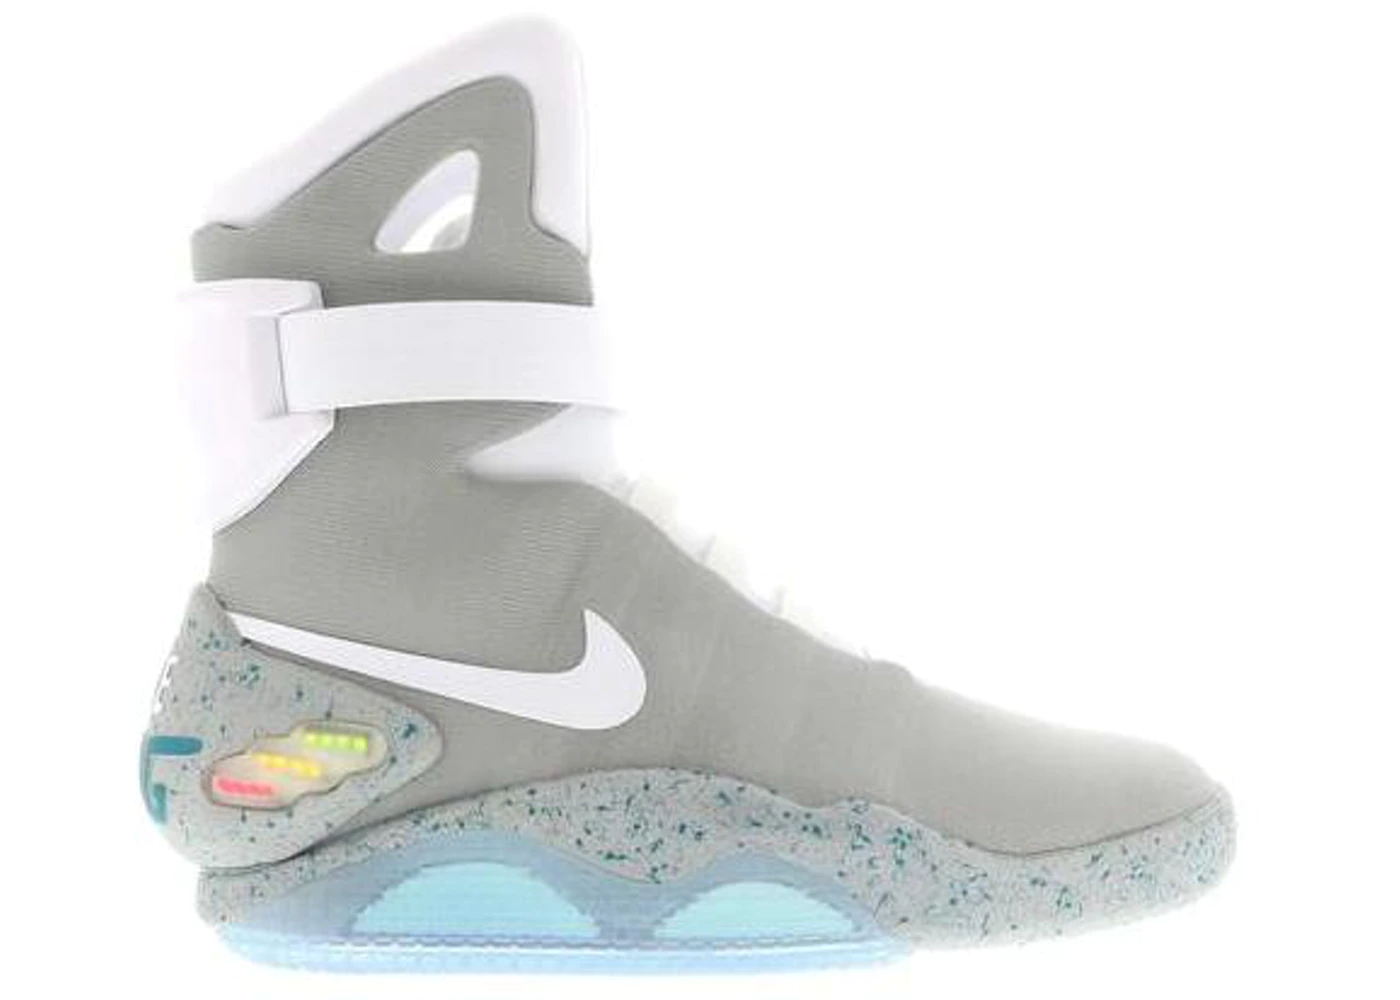 Nike MAG 'Back To The Future' (2016)